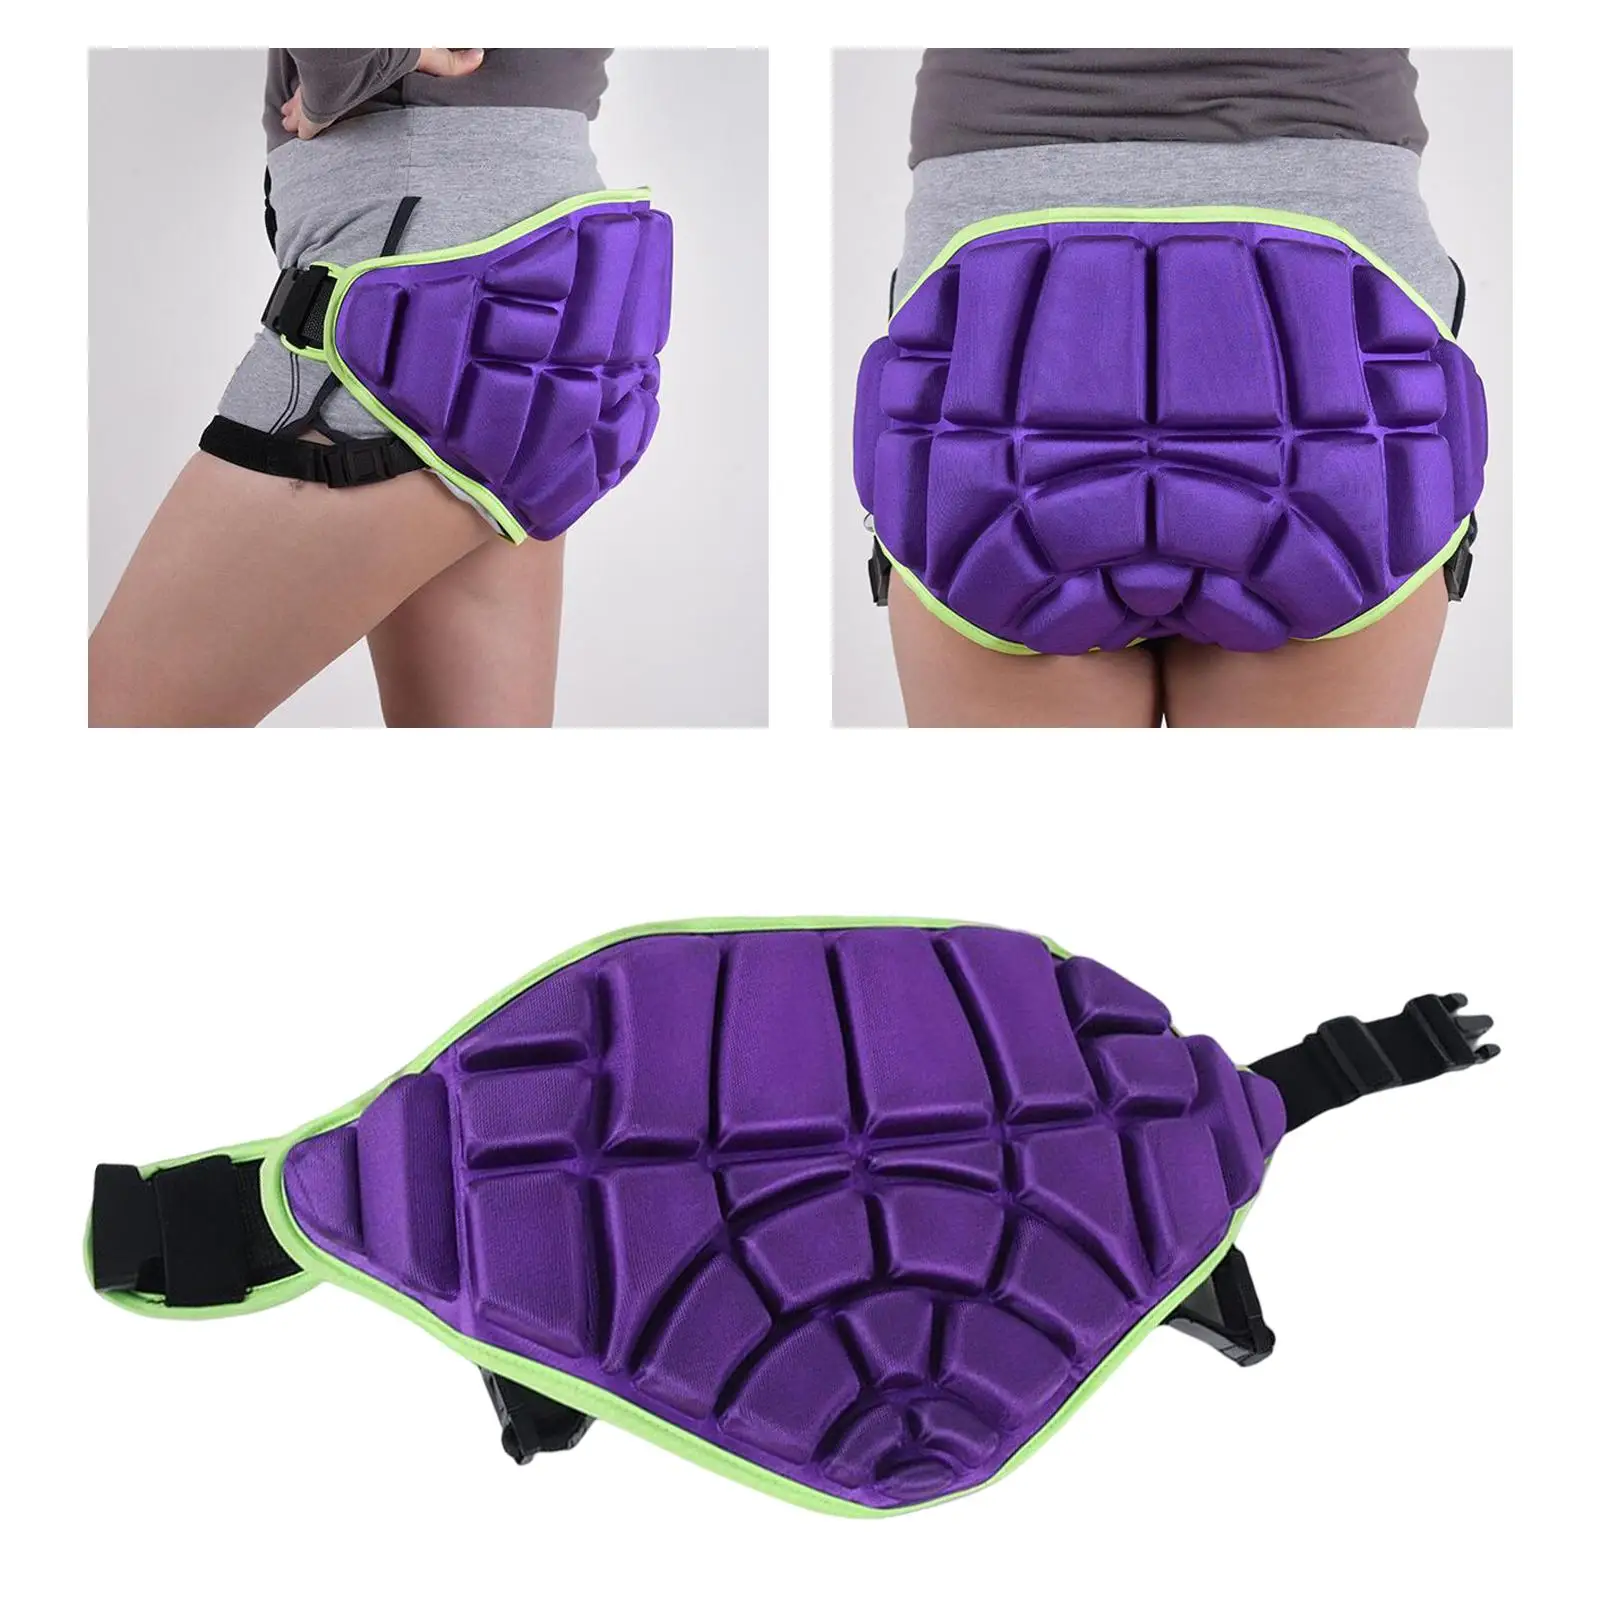 3D Padded Protection Hip Protection Easy to Take On and Off Butt Pad for Skateboarding